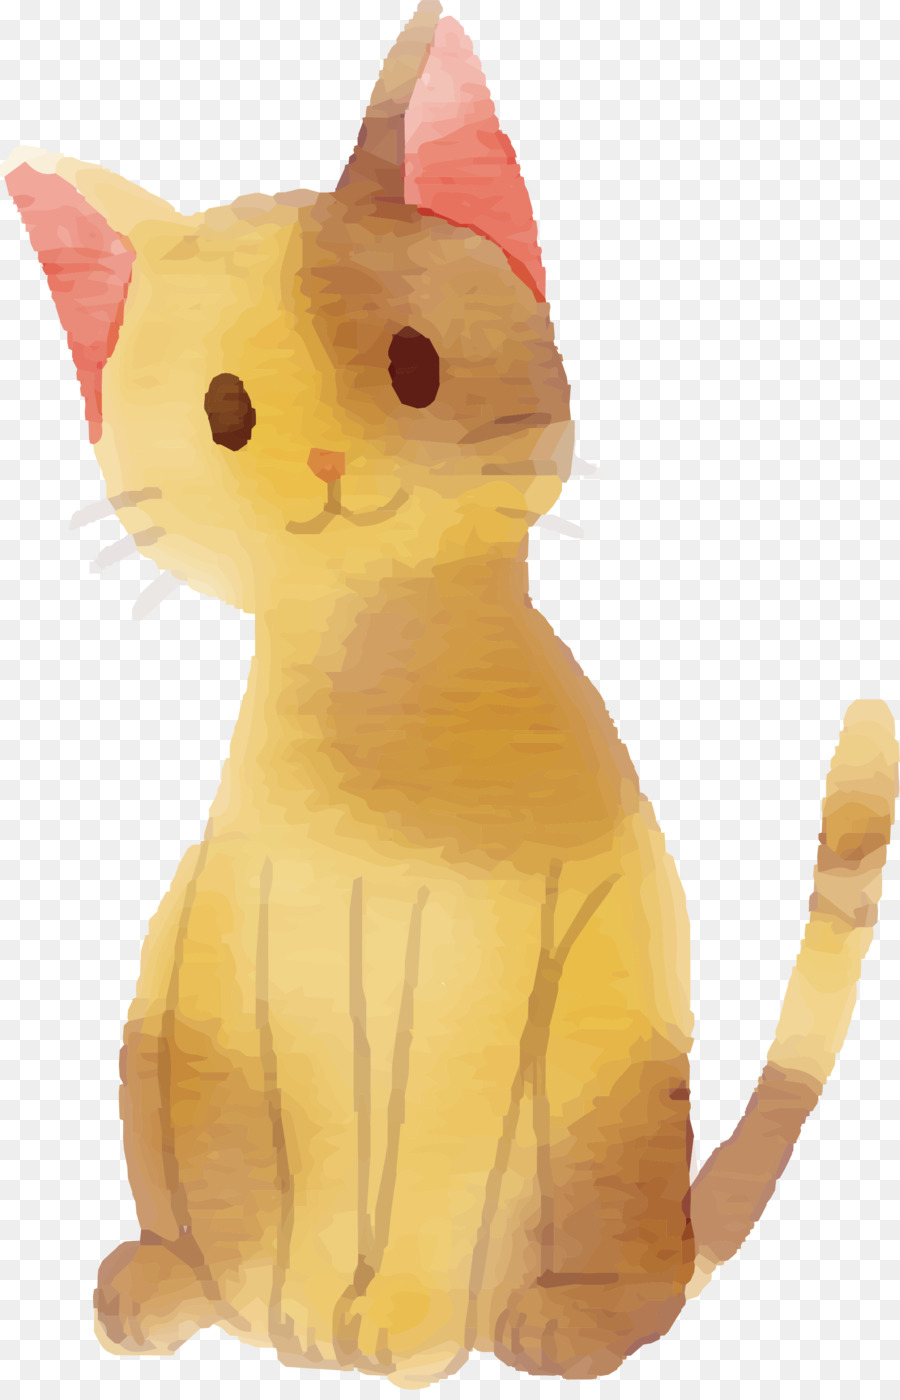 Cat Euclidean vector Computer file - Painted yellow cat png download - 1973*3047 - Free Transparent Cat png Download.